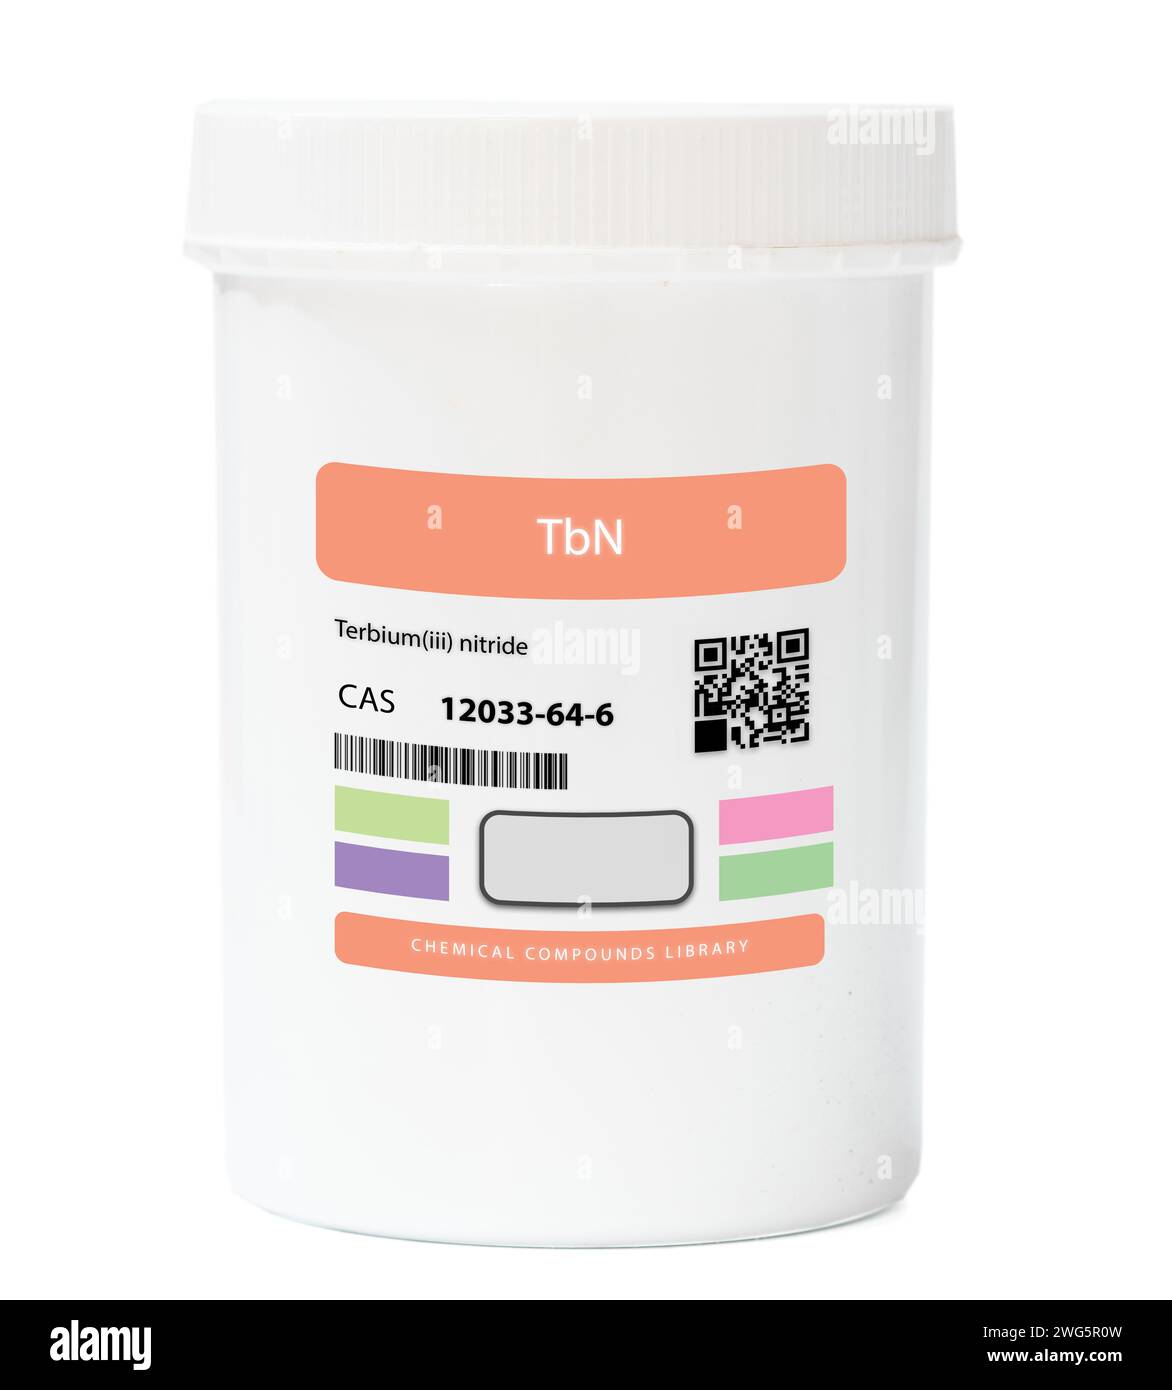 TbN - Terbium Nitride. Chemical compound. CAS number  12033-64-6 Stock Photo